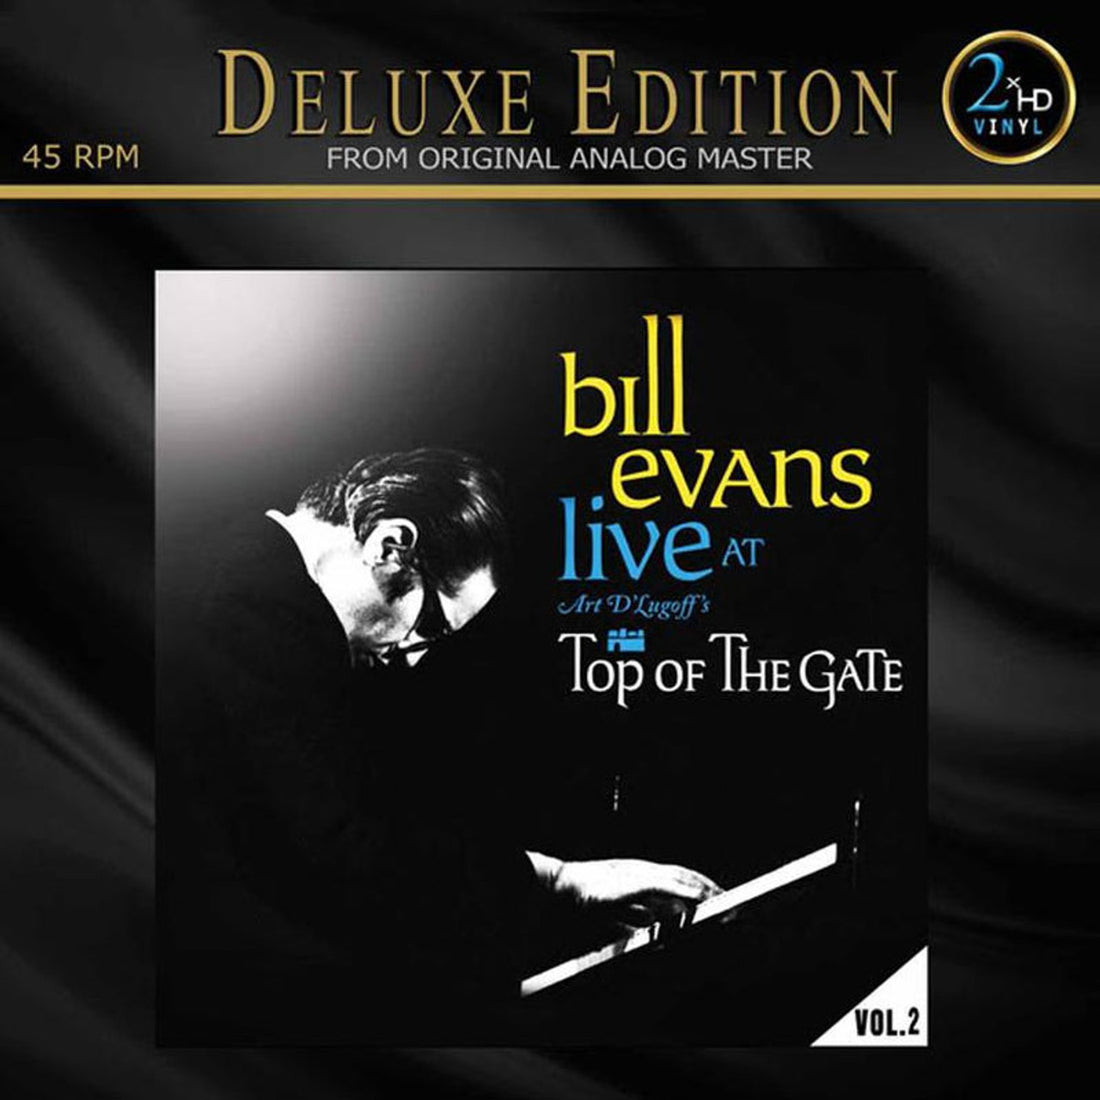 Bill Evans | Top of the Gate Vol. 2